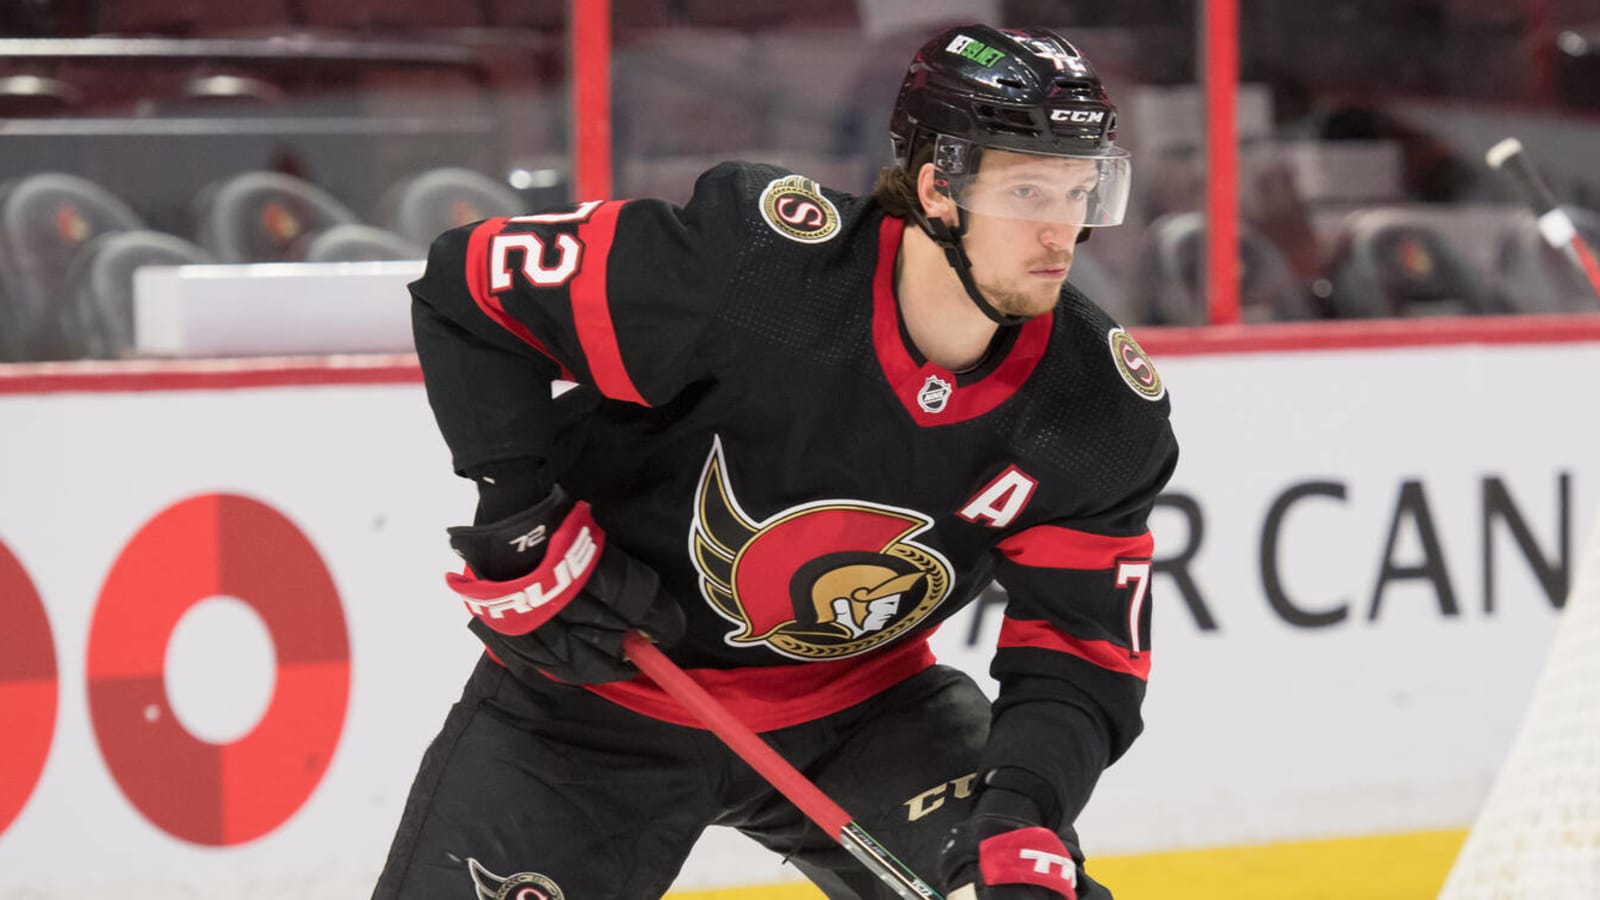 Thomas Chabot to miss remainder of season with broken hand